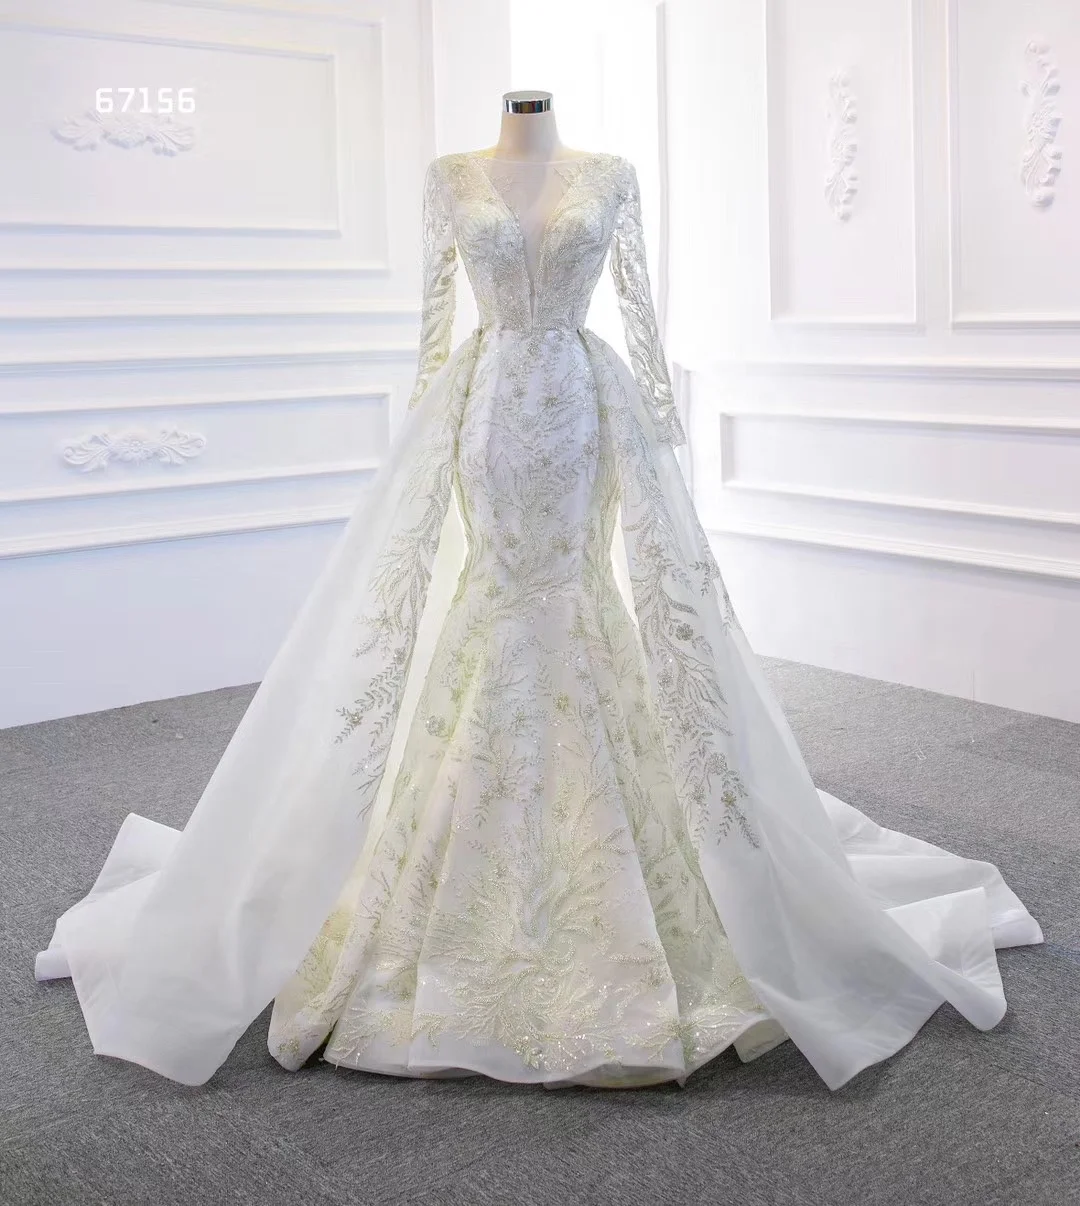 

Latest Designs Mermaid Wedding Dress Long Sleeve Bridal Gown Detachable Train Wedding Dress, As picture or your request